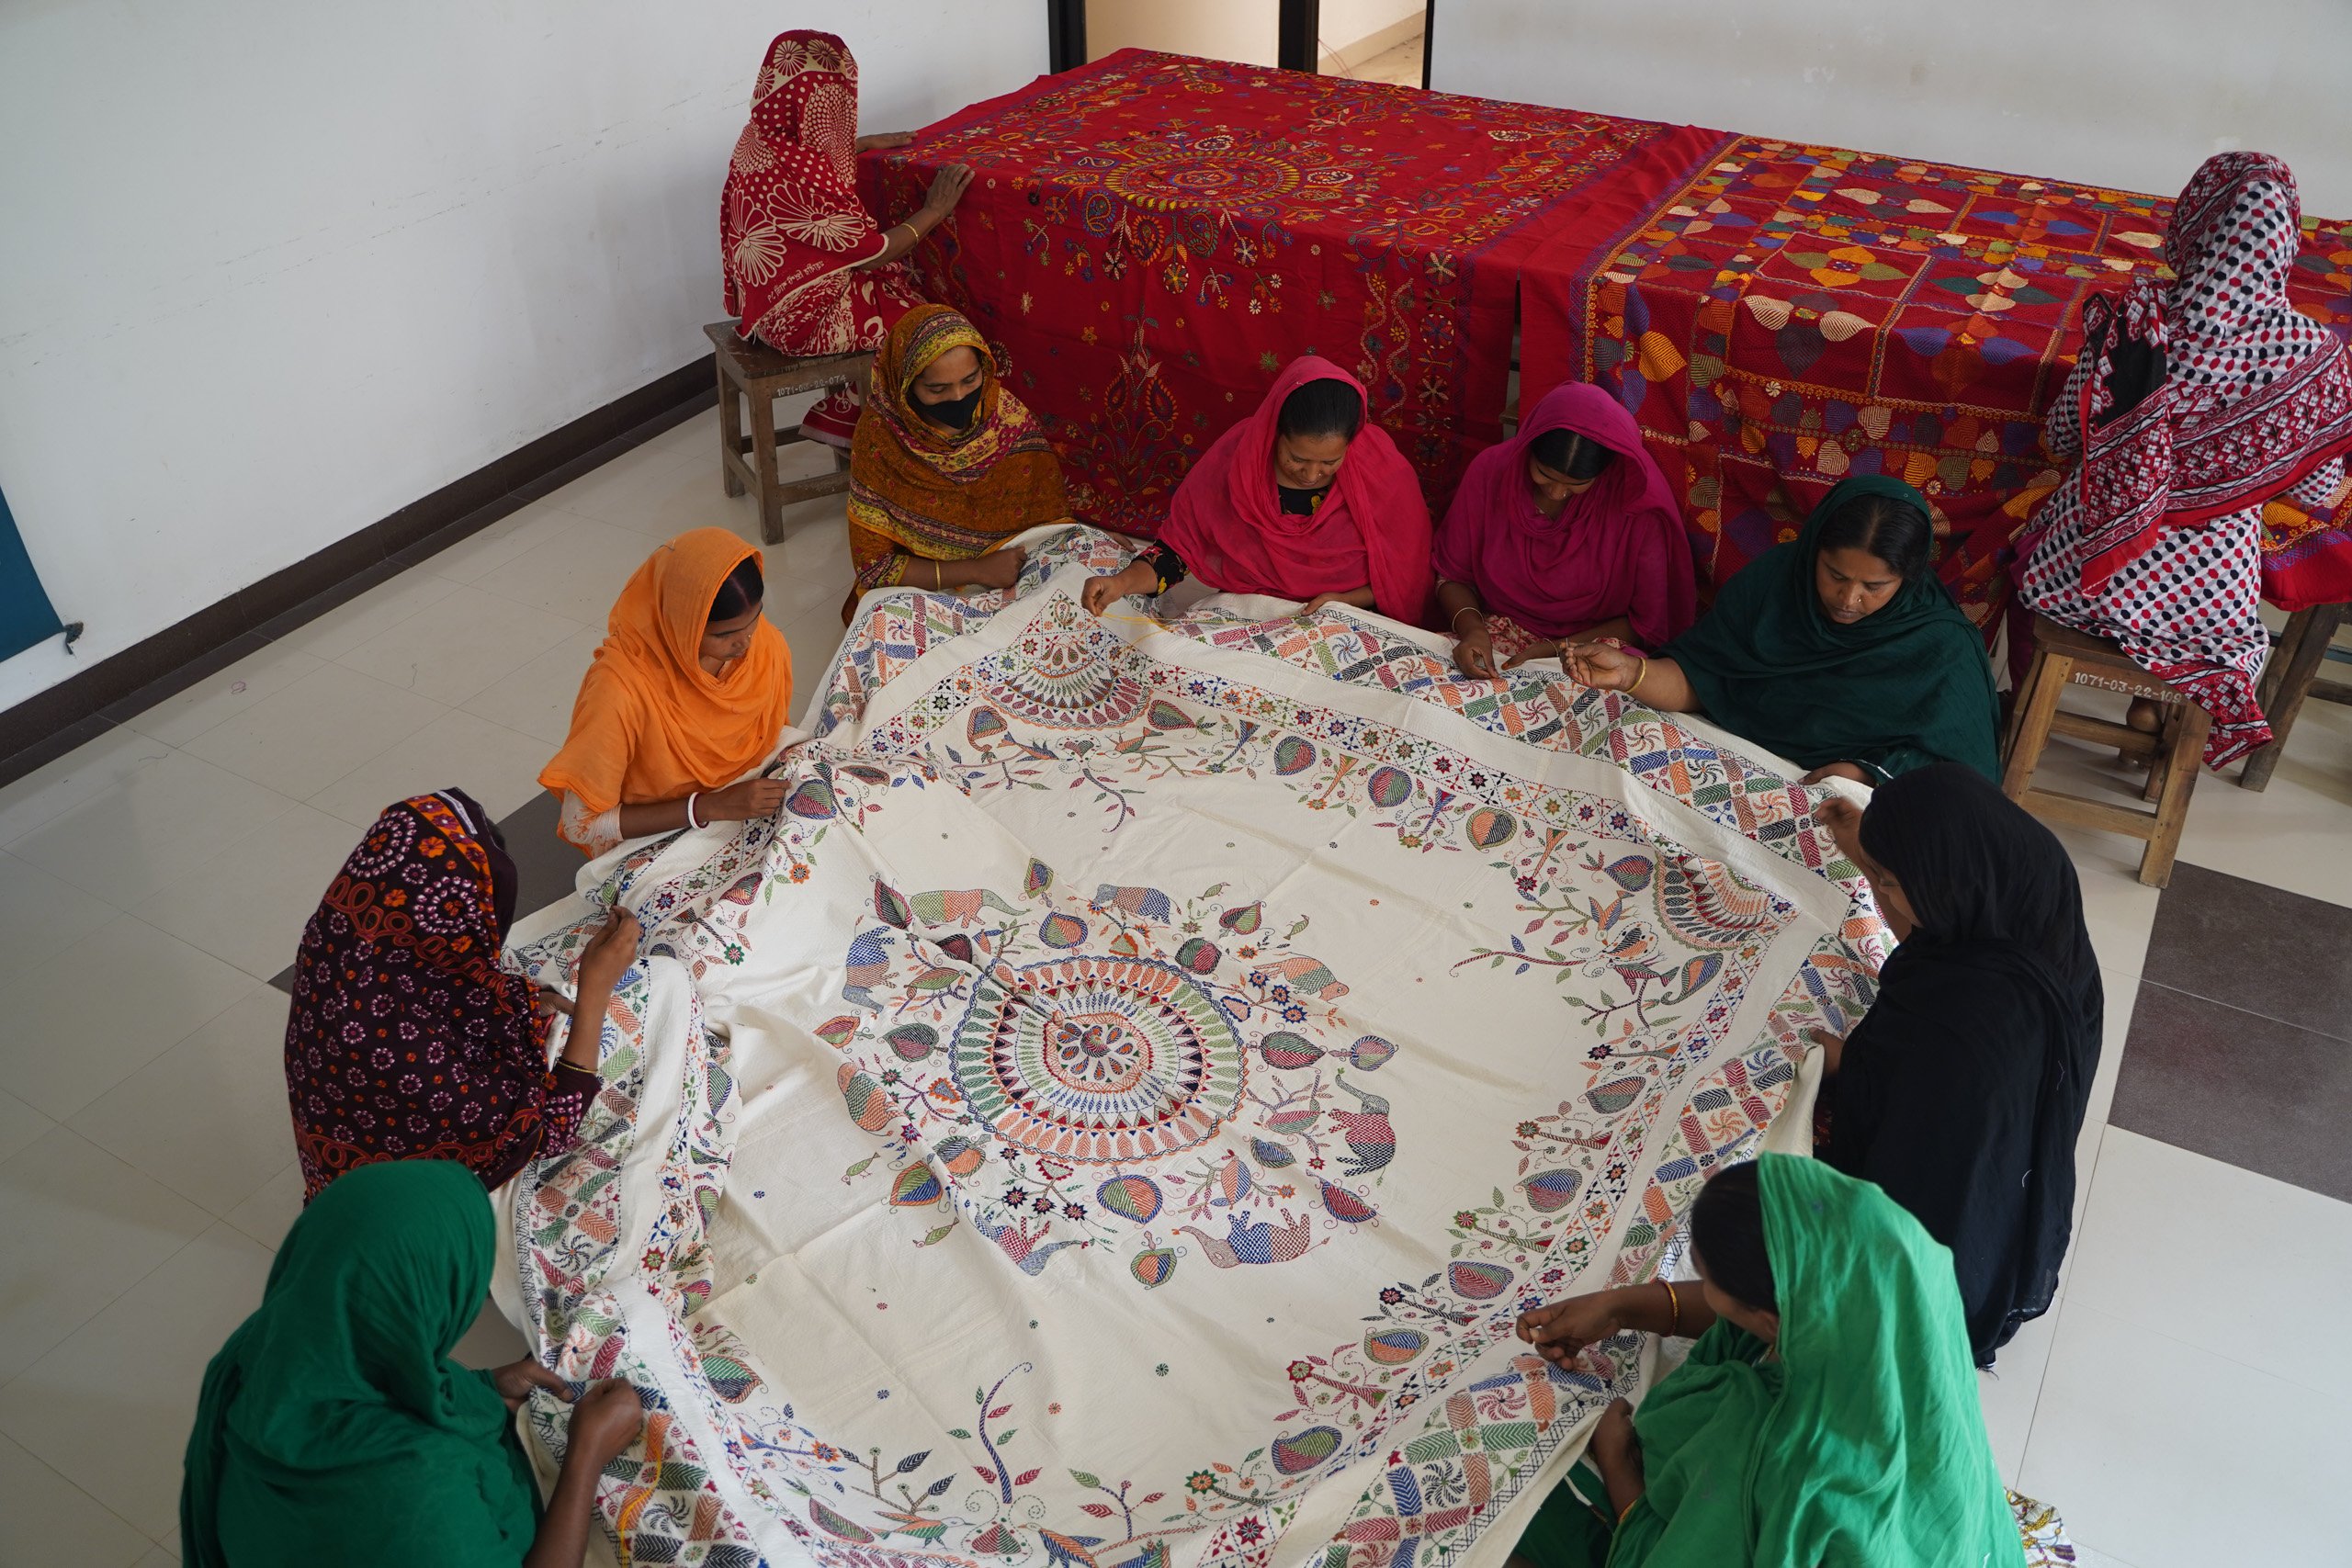 group of women embroidering borders of large white cloth